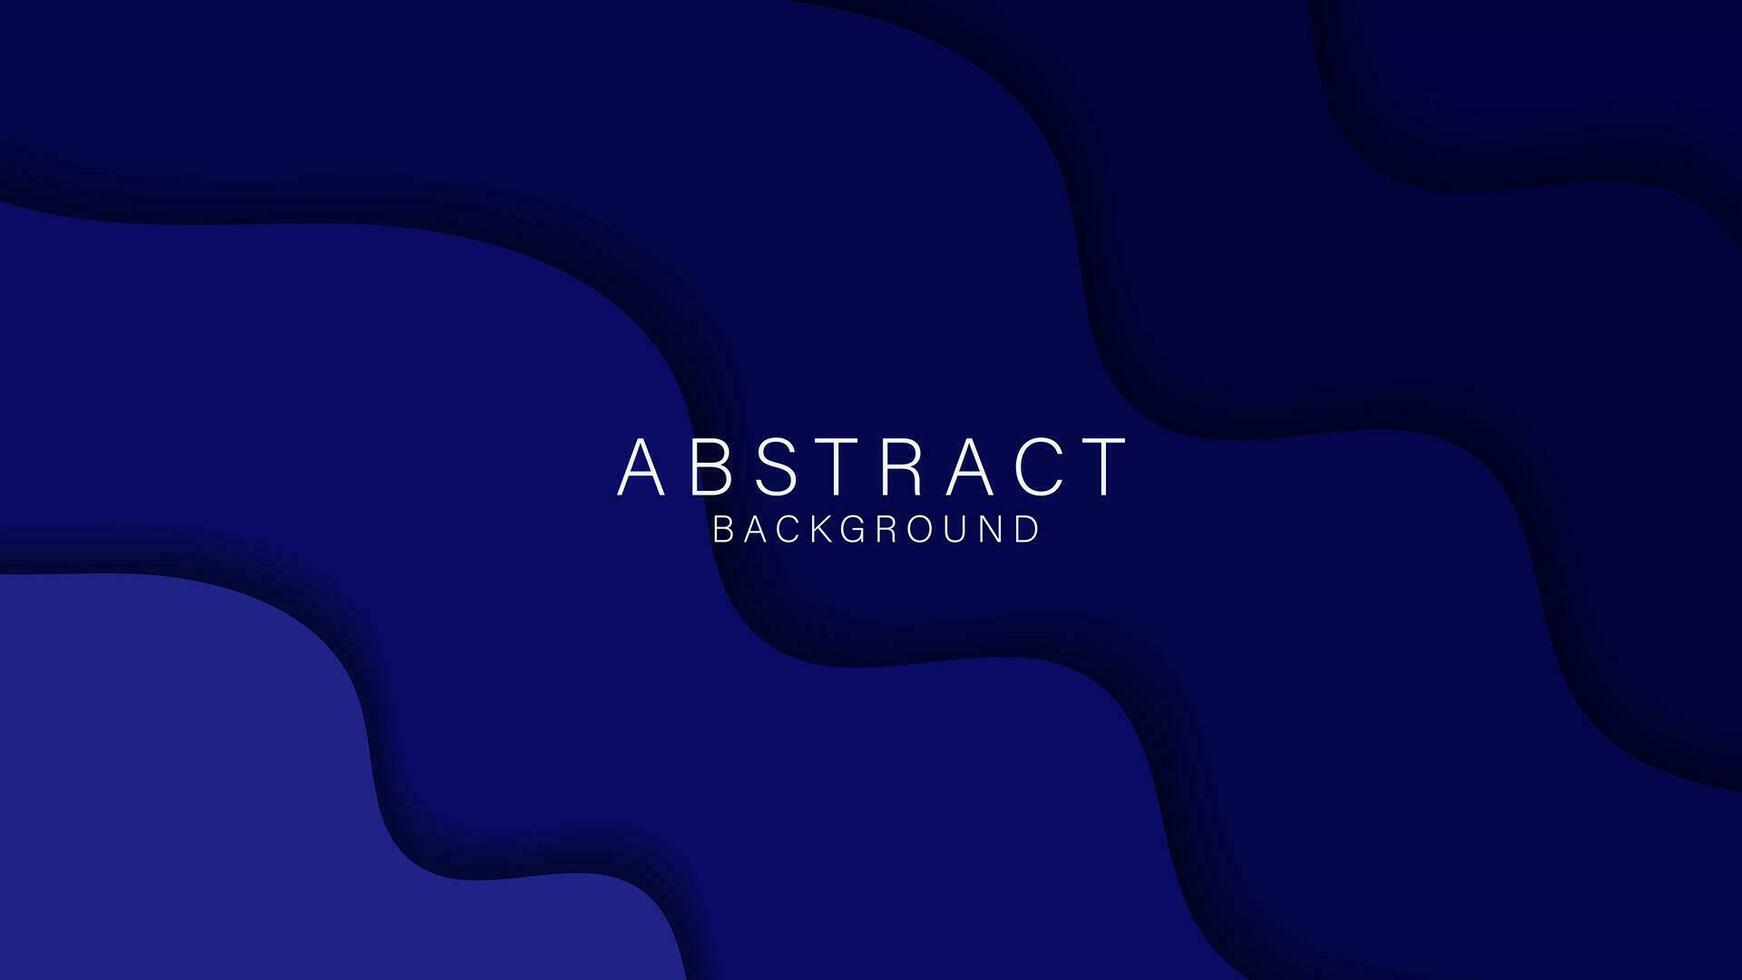 Abstract background in dark blue wave shape, Horizontal template background. Vector illustration design